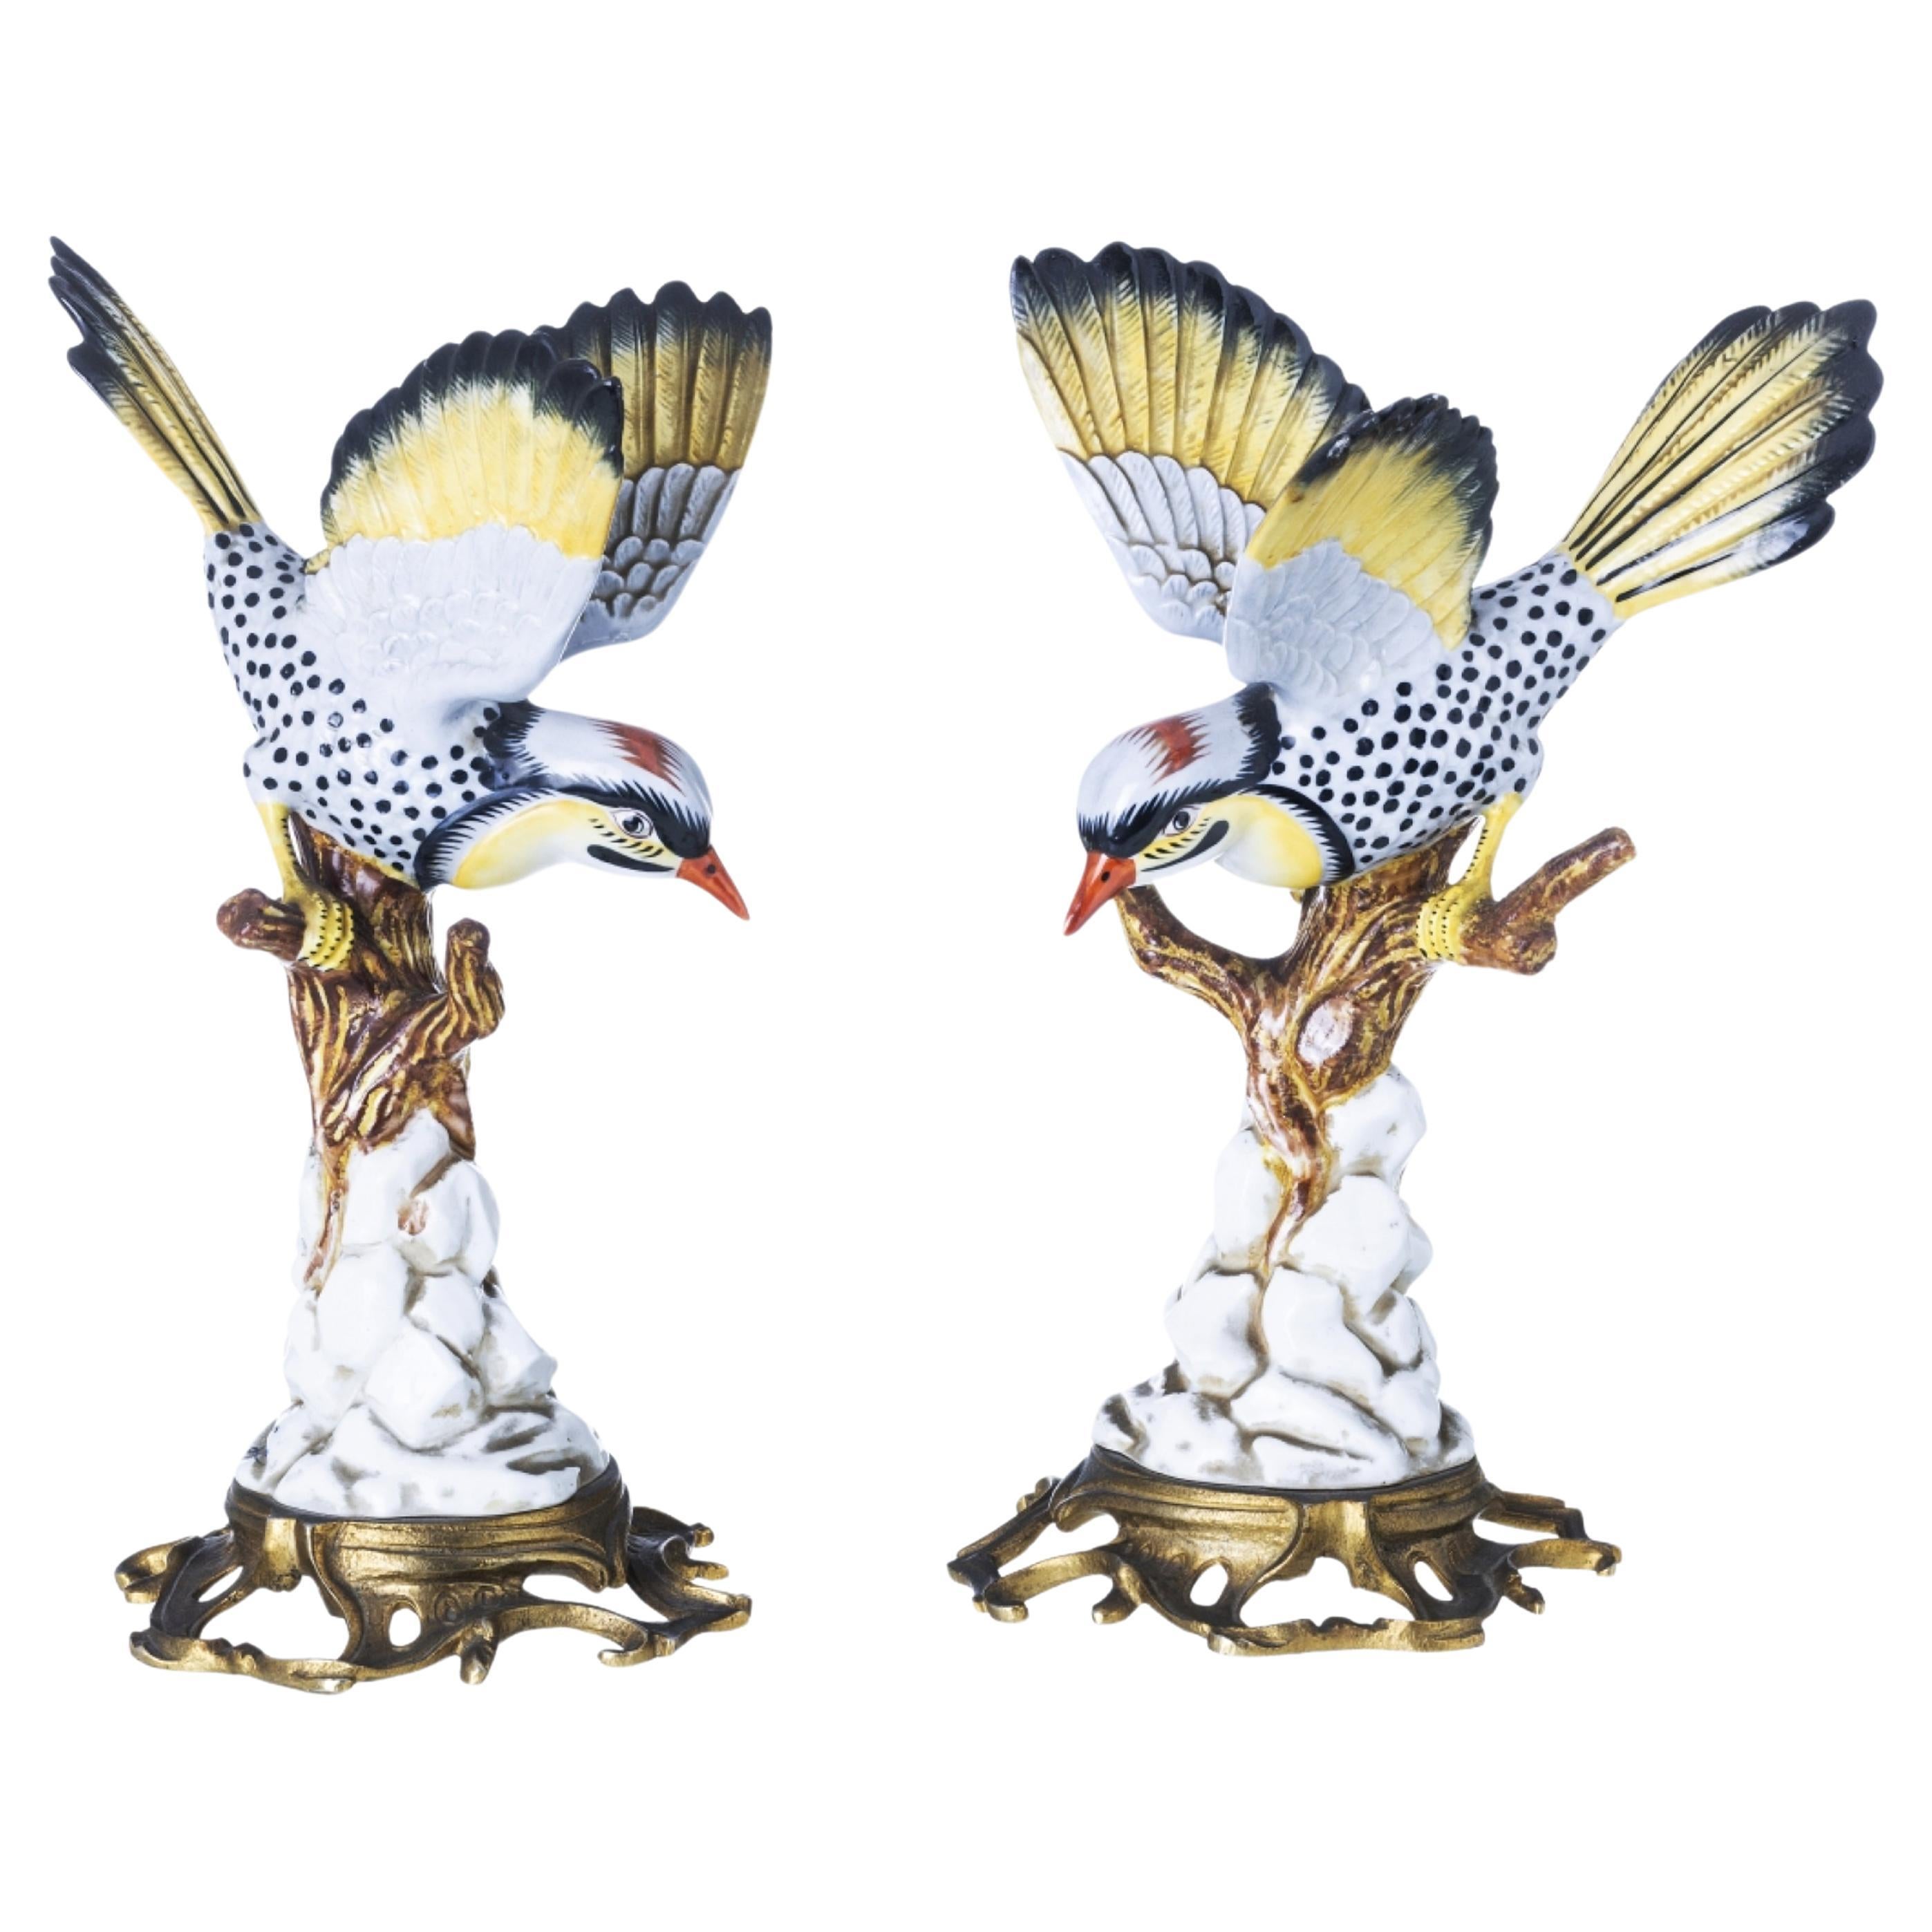 "PAIR OF BIRDS ON TORSO" FRENCH SCULPTURES SEVRES 19th Century For Sale